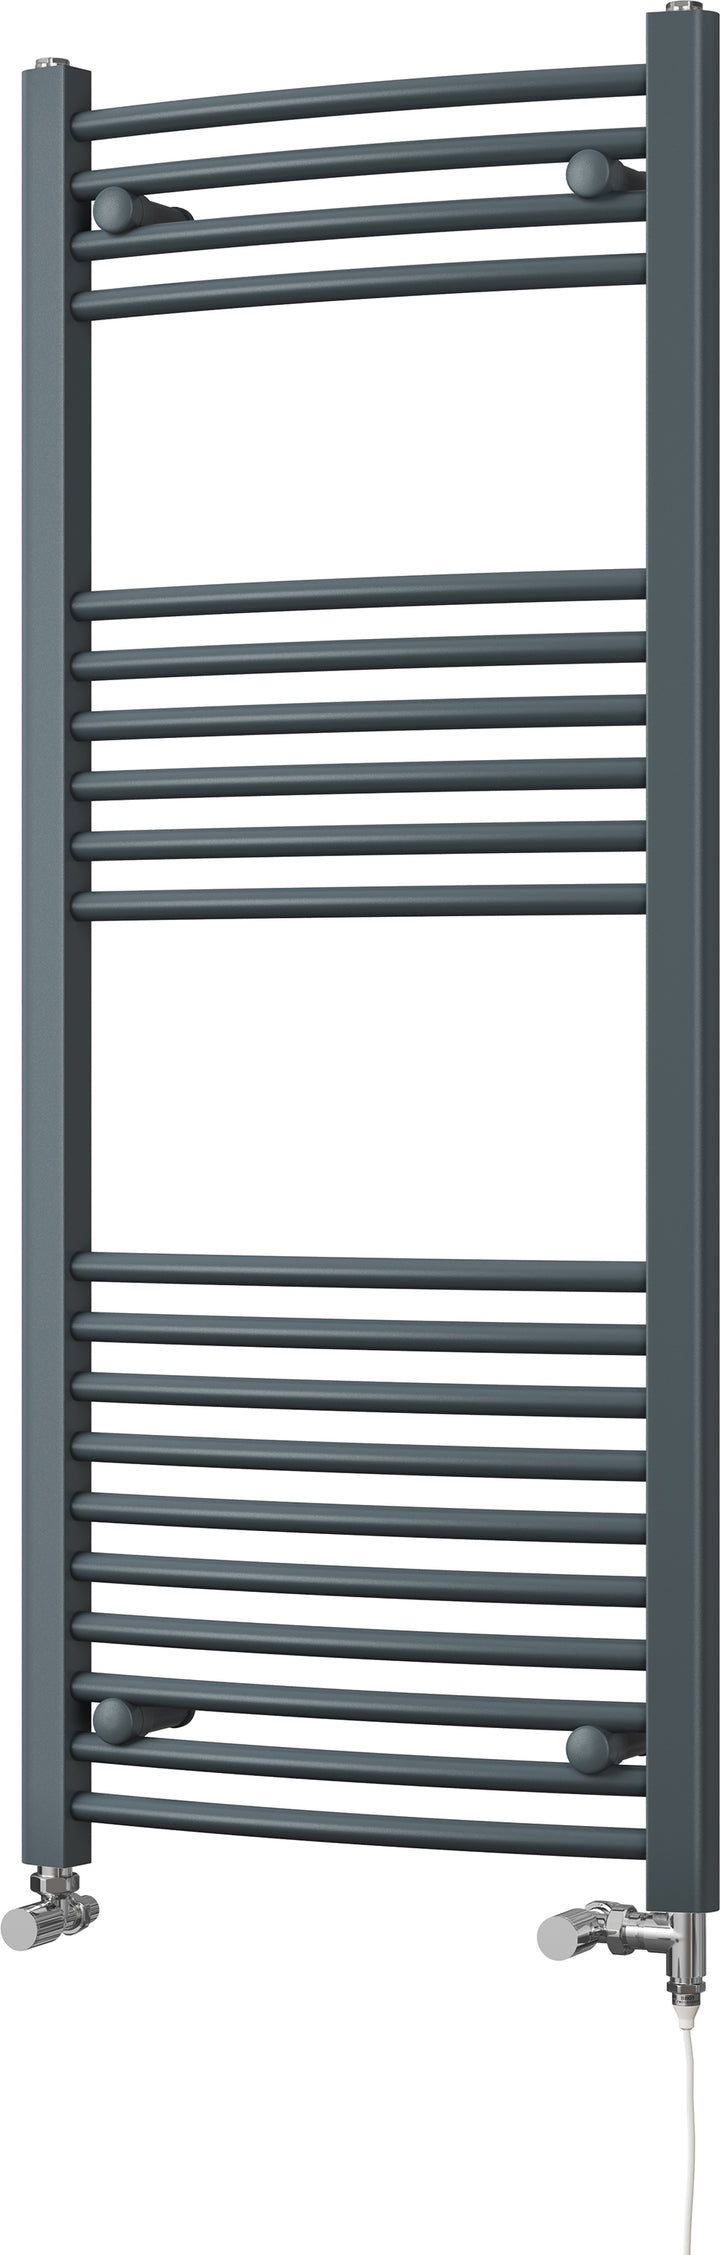 Zennor - Anthracite Dual Fuel Towel Rail  H1200mm x W500mm Standard - Curved